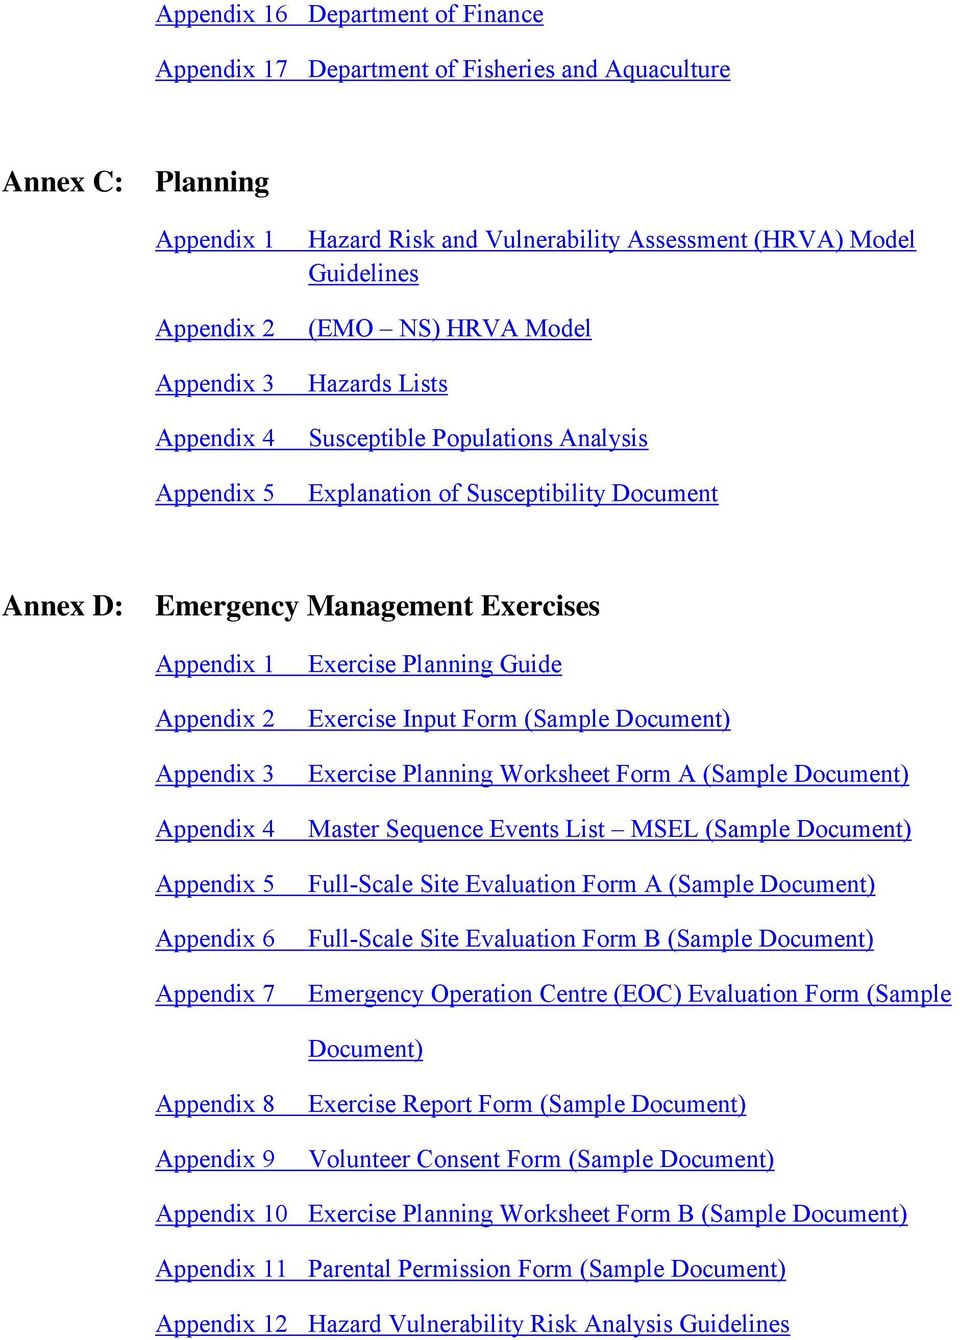 Appendix 3 Appendix 4 Appendix 5 Appendix 6 Appendix 7 Exercise Planning Guide Exercise Input Form (Sample Document) Exercise Planning Worksheet Form A (Sample Document) Master Sequence Events List